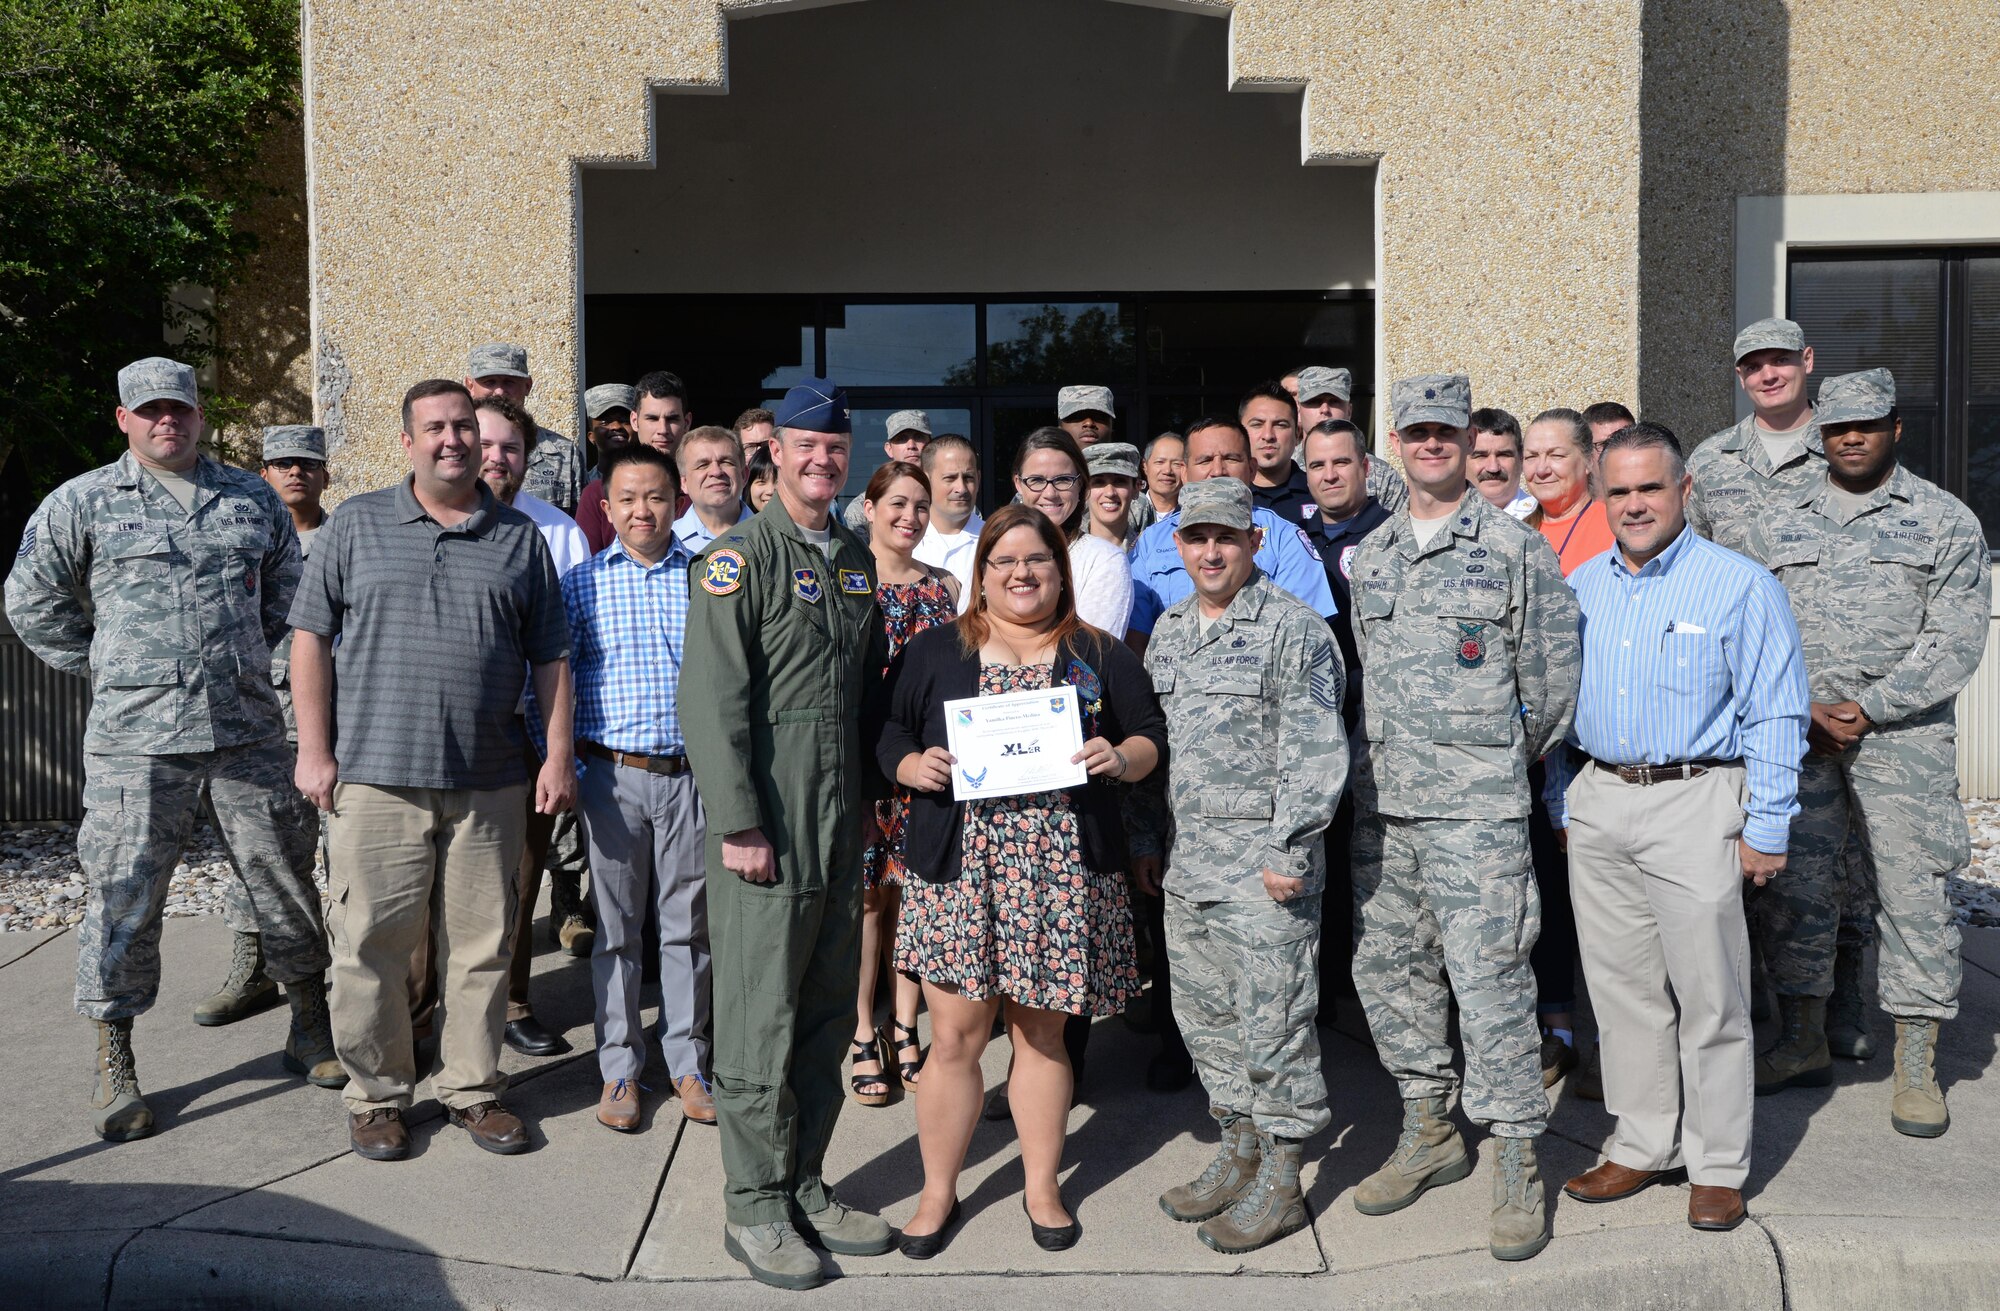 Ms. Yamilka Pinero-Medina, 47th Civil Engineering Squadron Energy Manager, was chosen by wing leadership to be this week’s “XLer,” June 6, 2017. The “XLer” award is presented by Col. Thomas Shank, 47th Flying Training Wing commander, and is given to those who consistently make outstanding contributions to their unit, Laughlin and the flying training mission. (U.S. Air Force photo/Airman 1st Class Daniel Hambor)